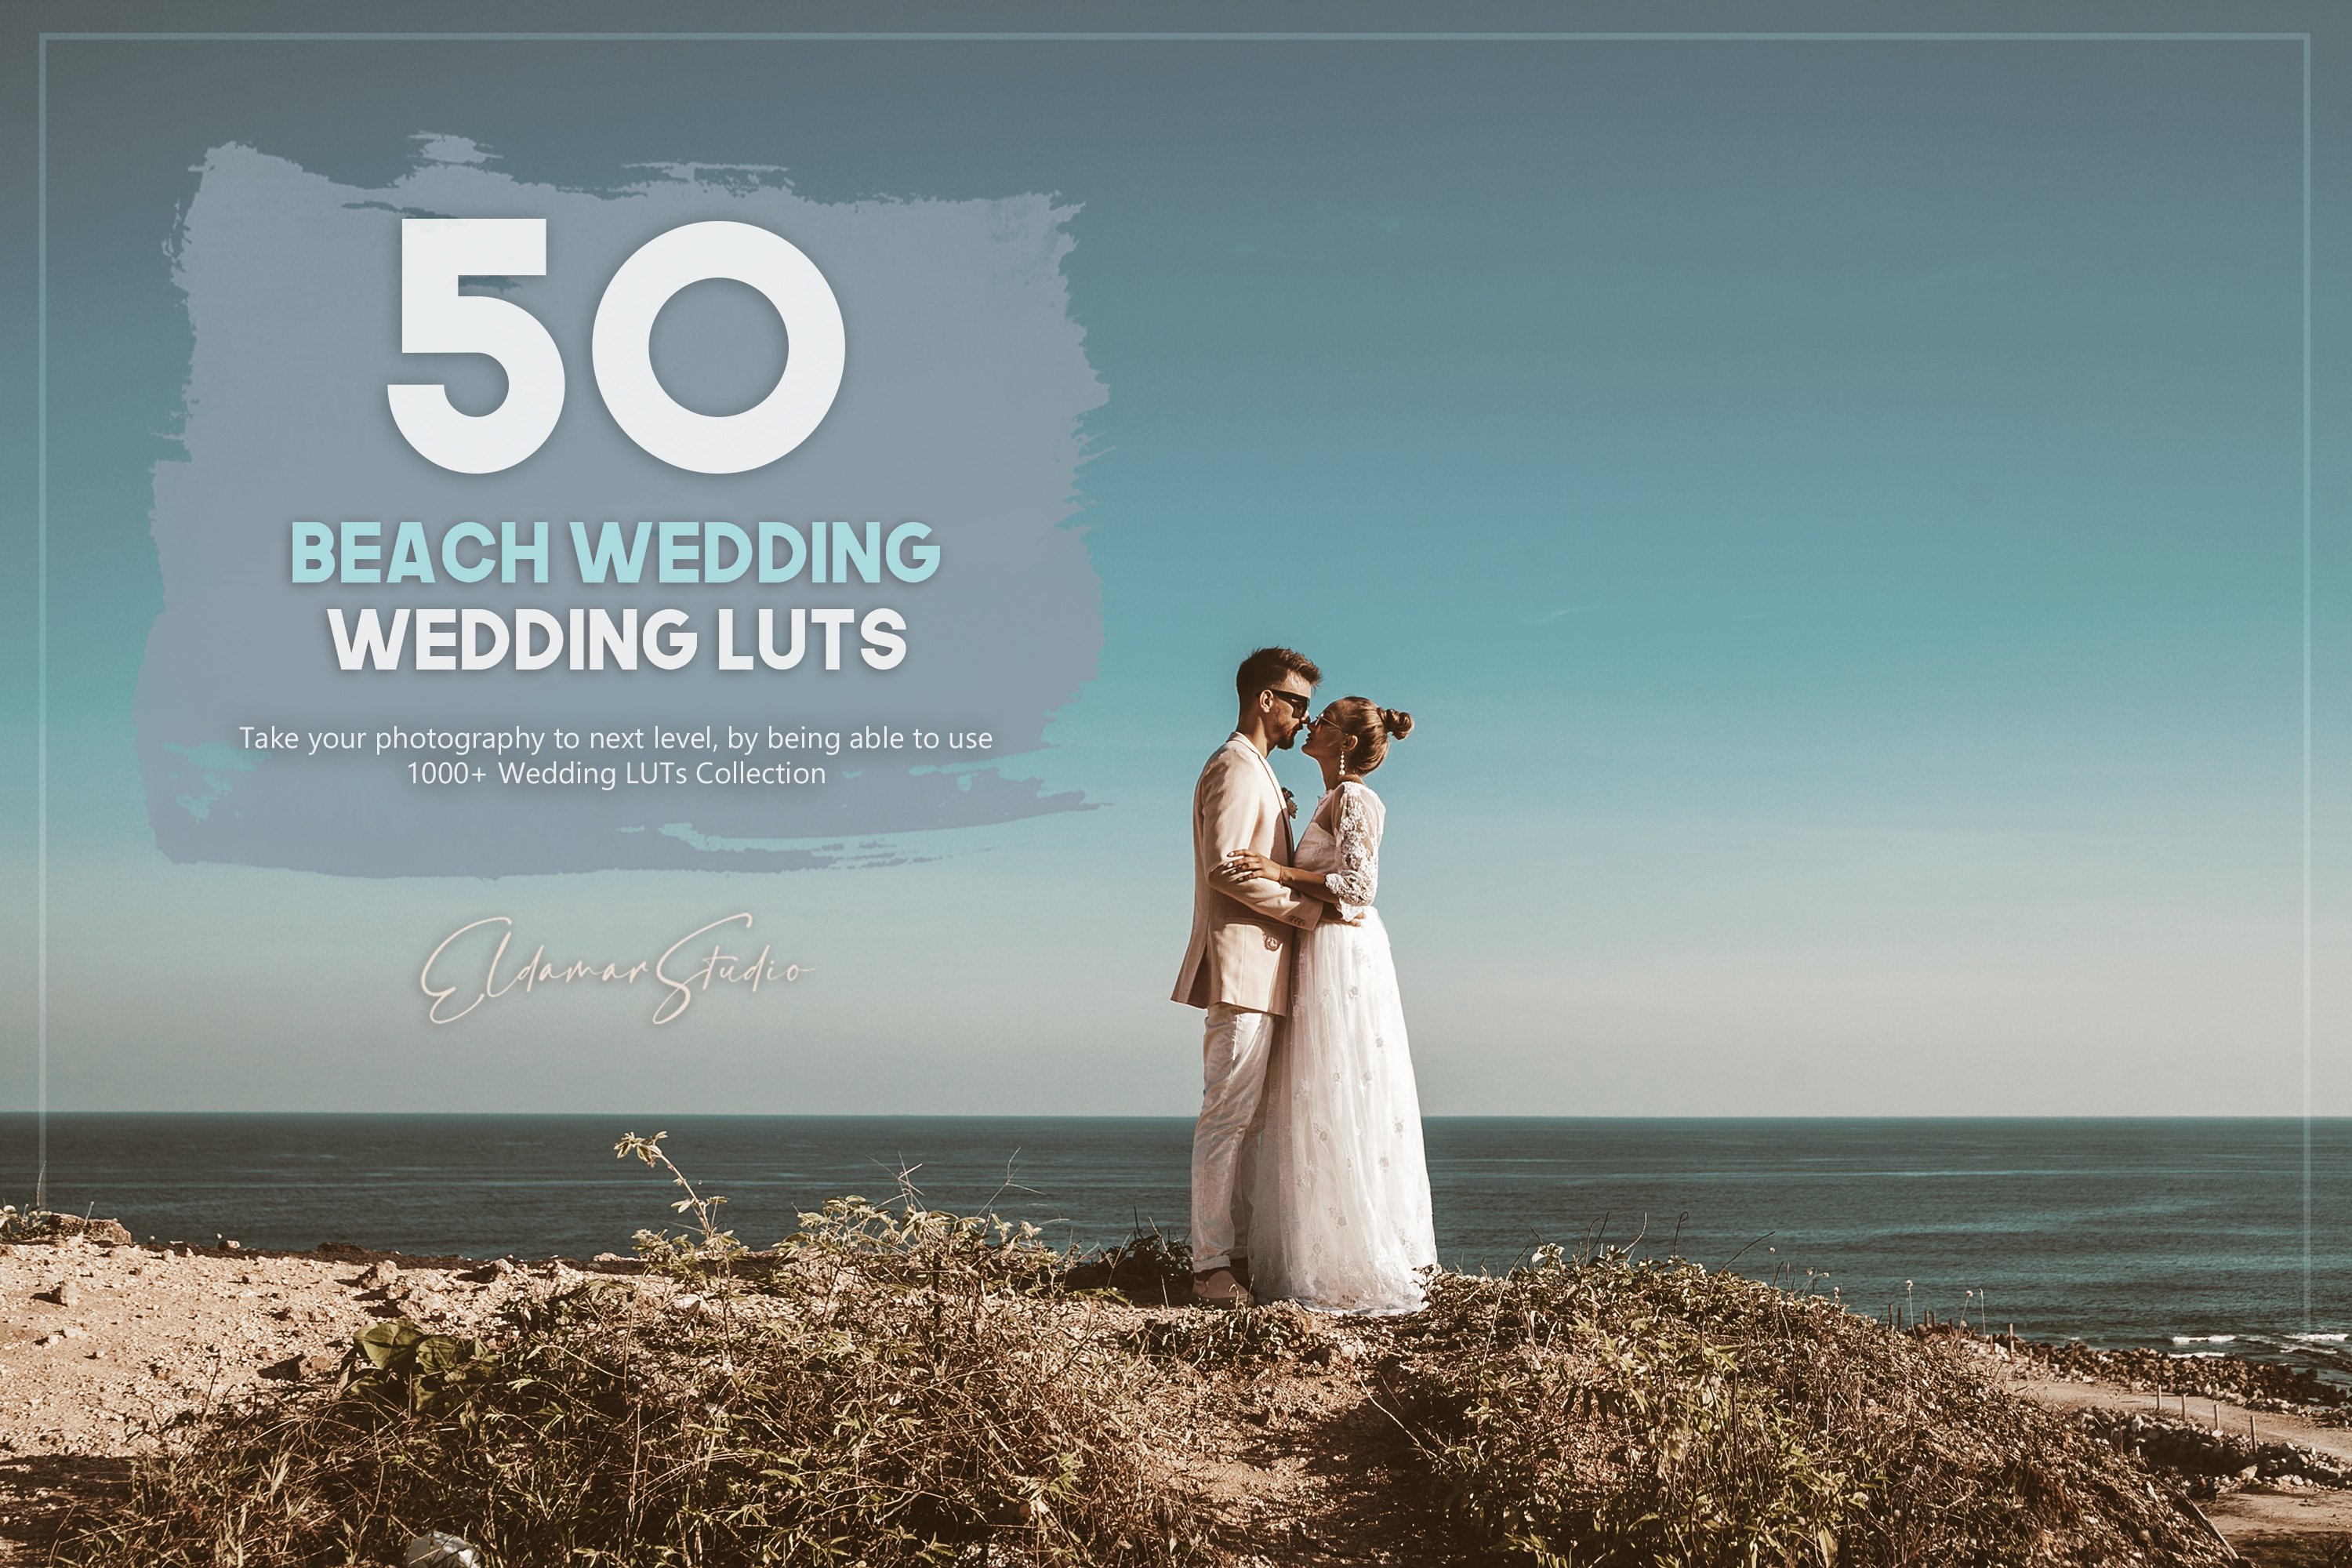 50 Beach Wedding LUTs Packcover image.